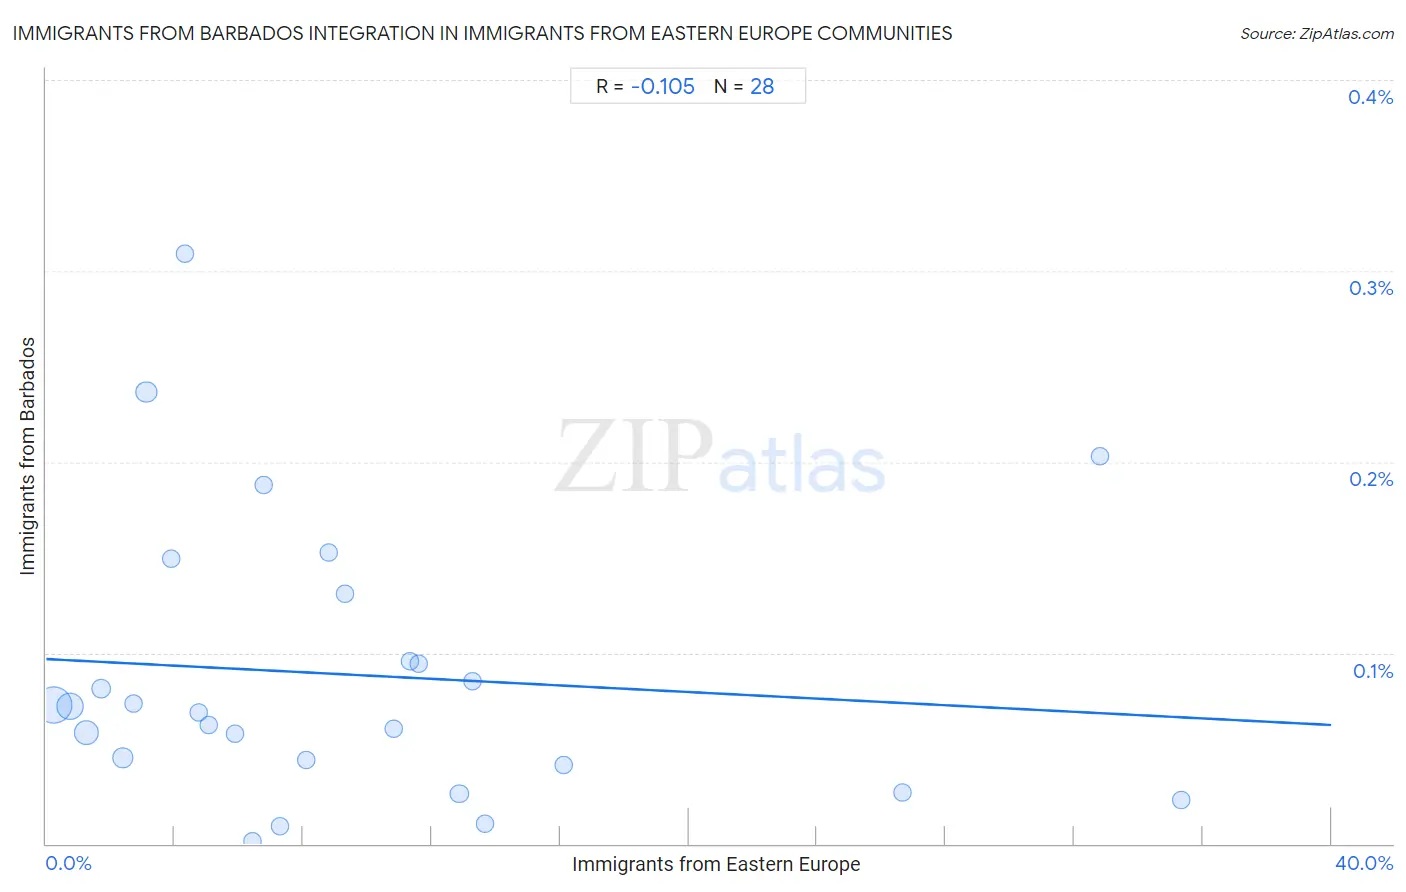 Immigrants from Eastern Europe Integration in Immigrants from Barbados Communities